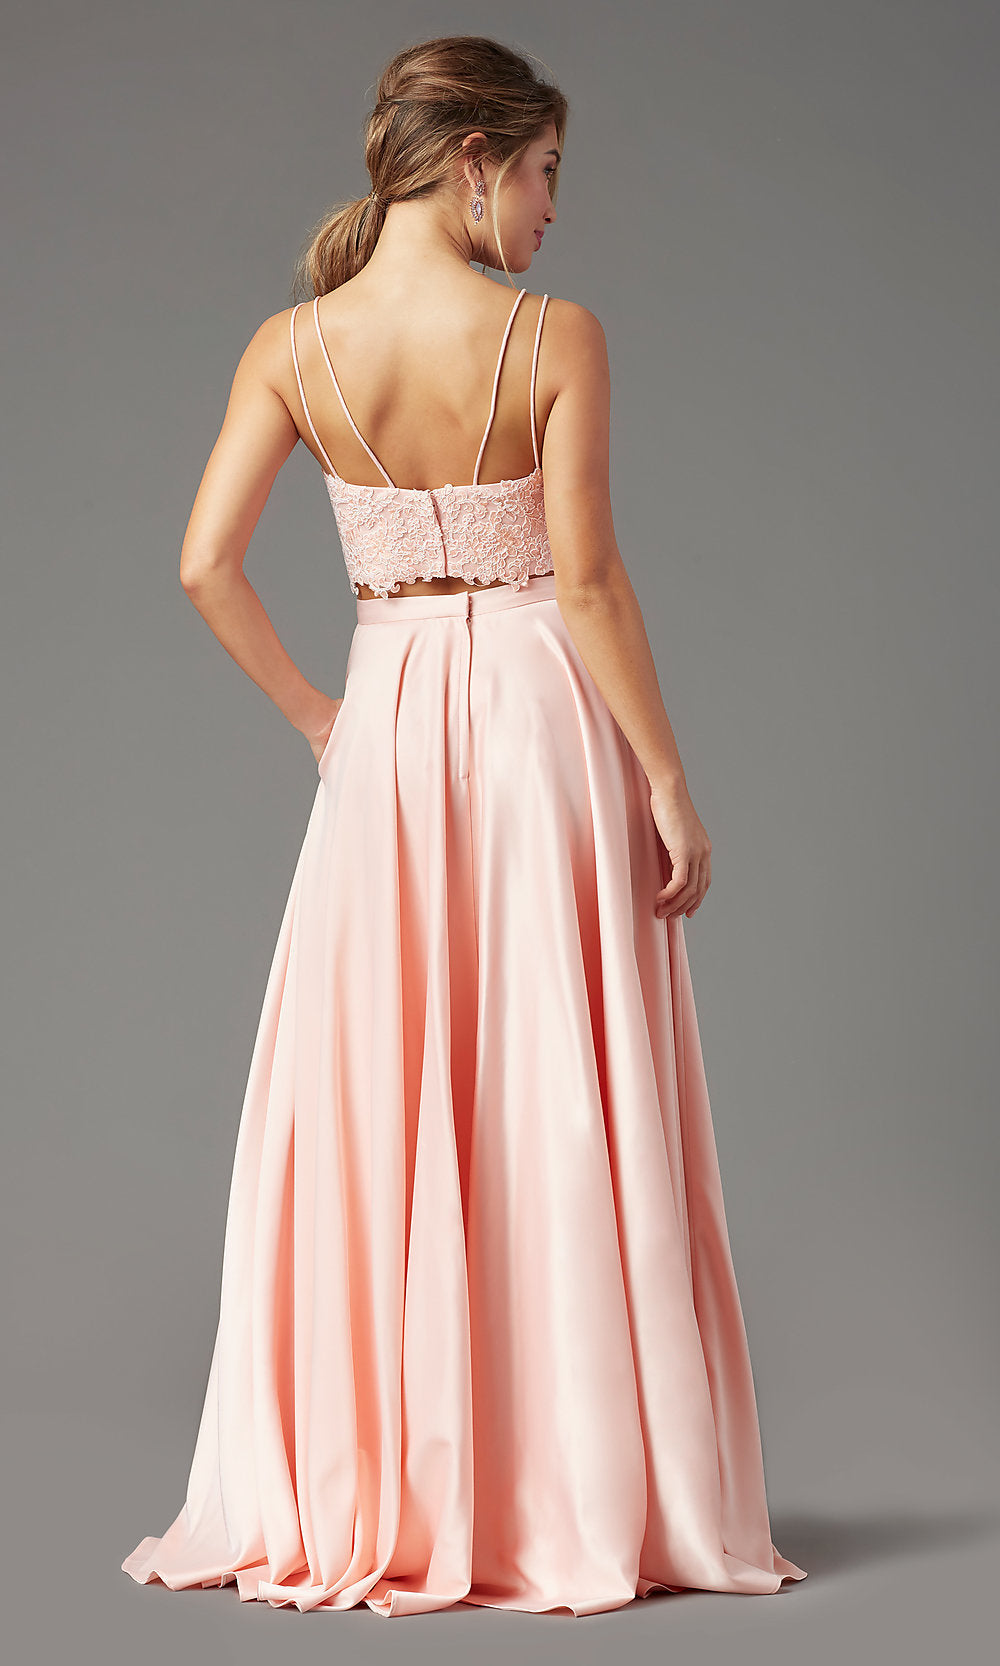  Satin Long Two-Piece Formal Prom Dress by PromGirl